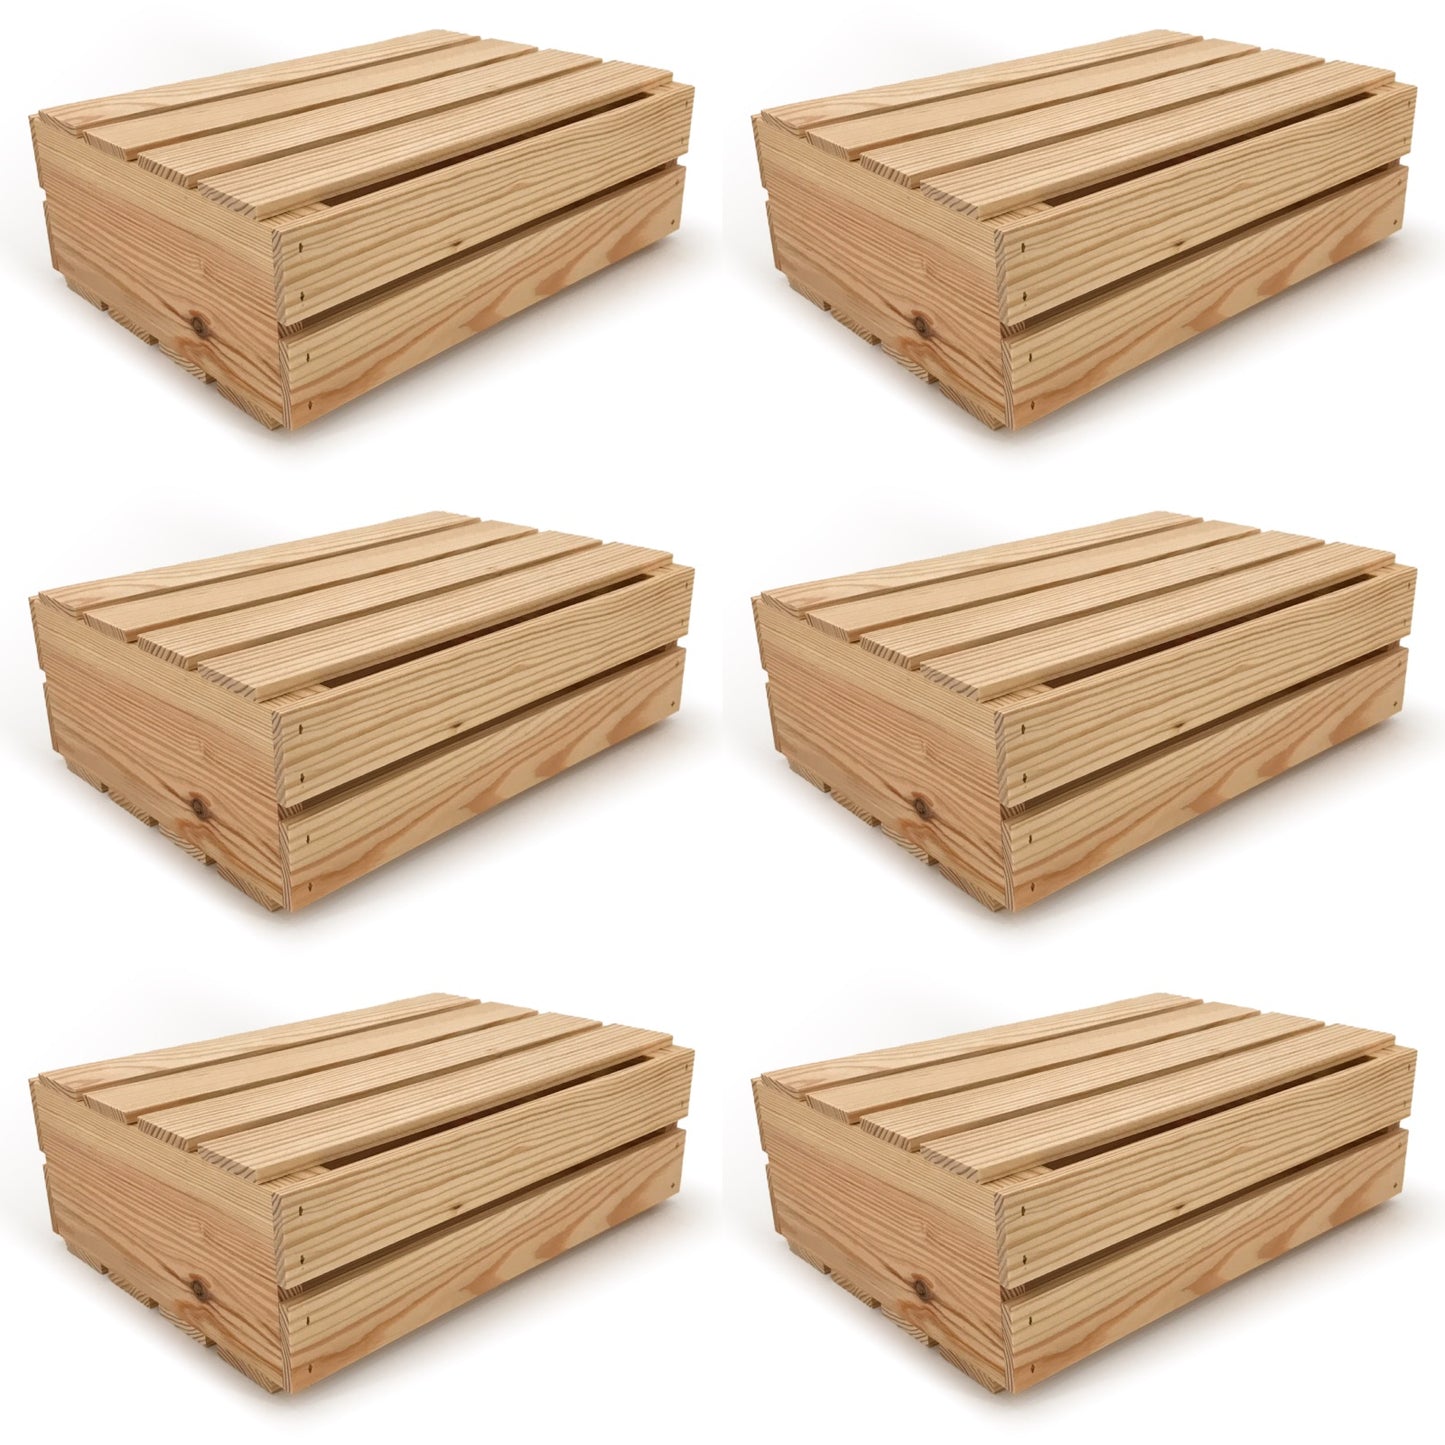 6 Small wooden crates with lid 16x12x5.25, 6-WS-16-12-5.25-NX-NW-LL, 12-WS-16-12-5.25-NX-NW-LL, 24-WS-16-12-5.25-NX-NW-LL, 48-WS-16-12-5.25-NX-NW-LL, 96-WS-16-12-5.25-NX-NW-LL